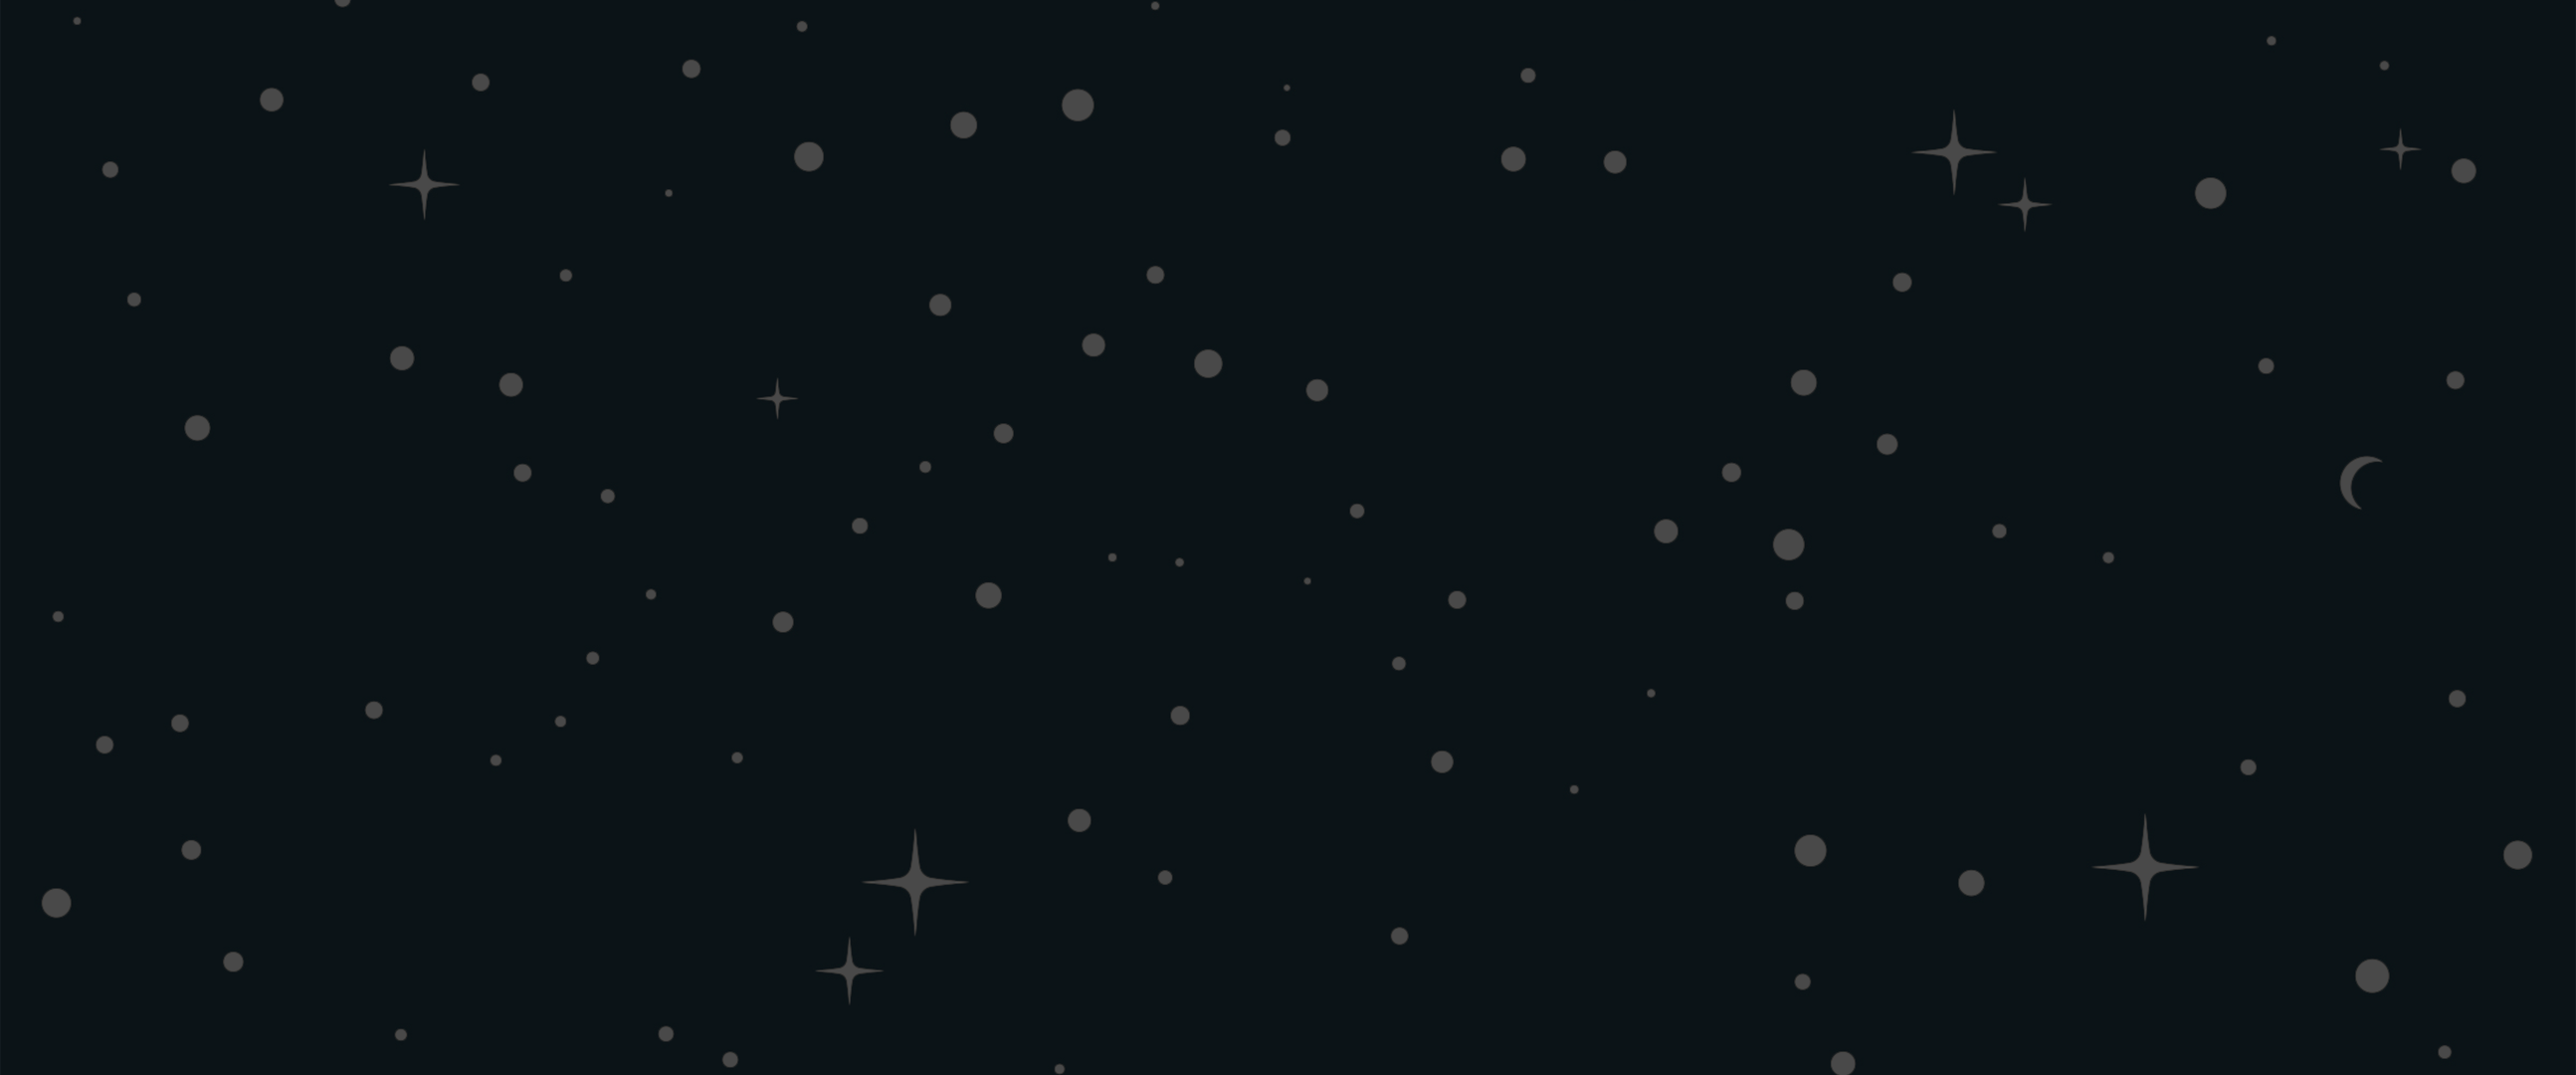 Outer Space Background with white-gray stars sprinkled throughout. 